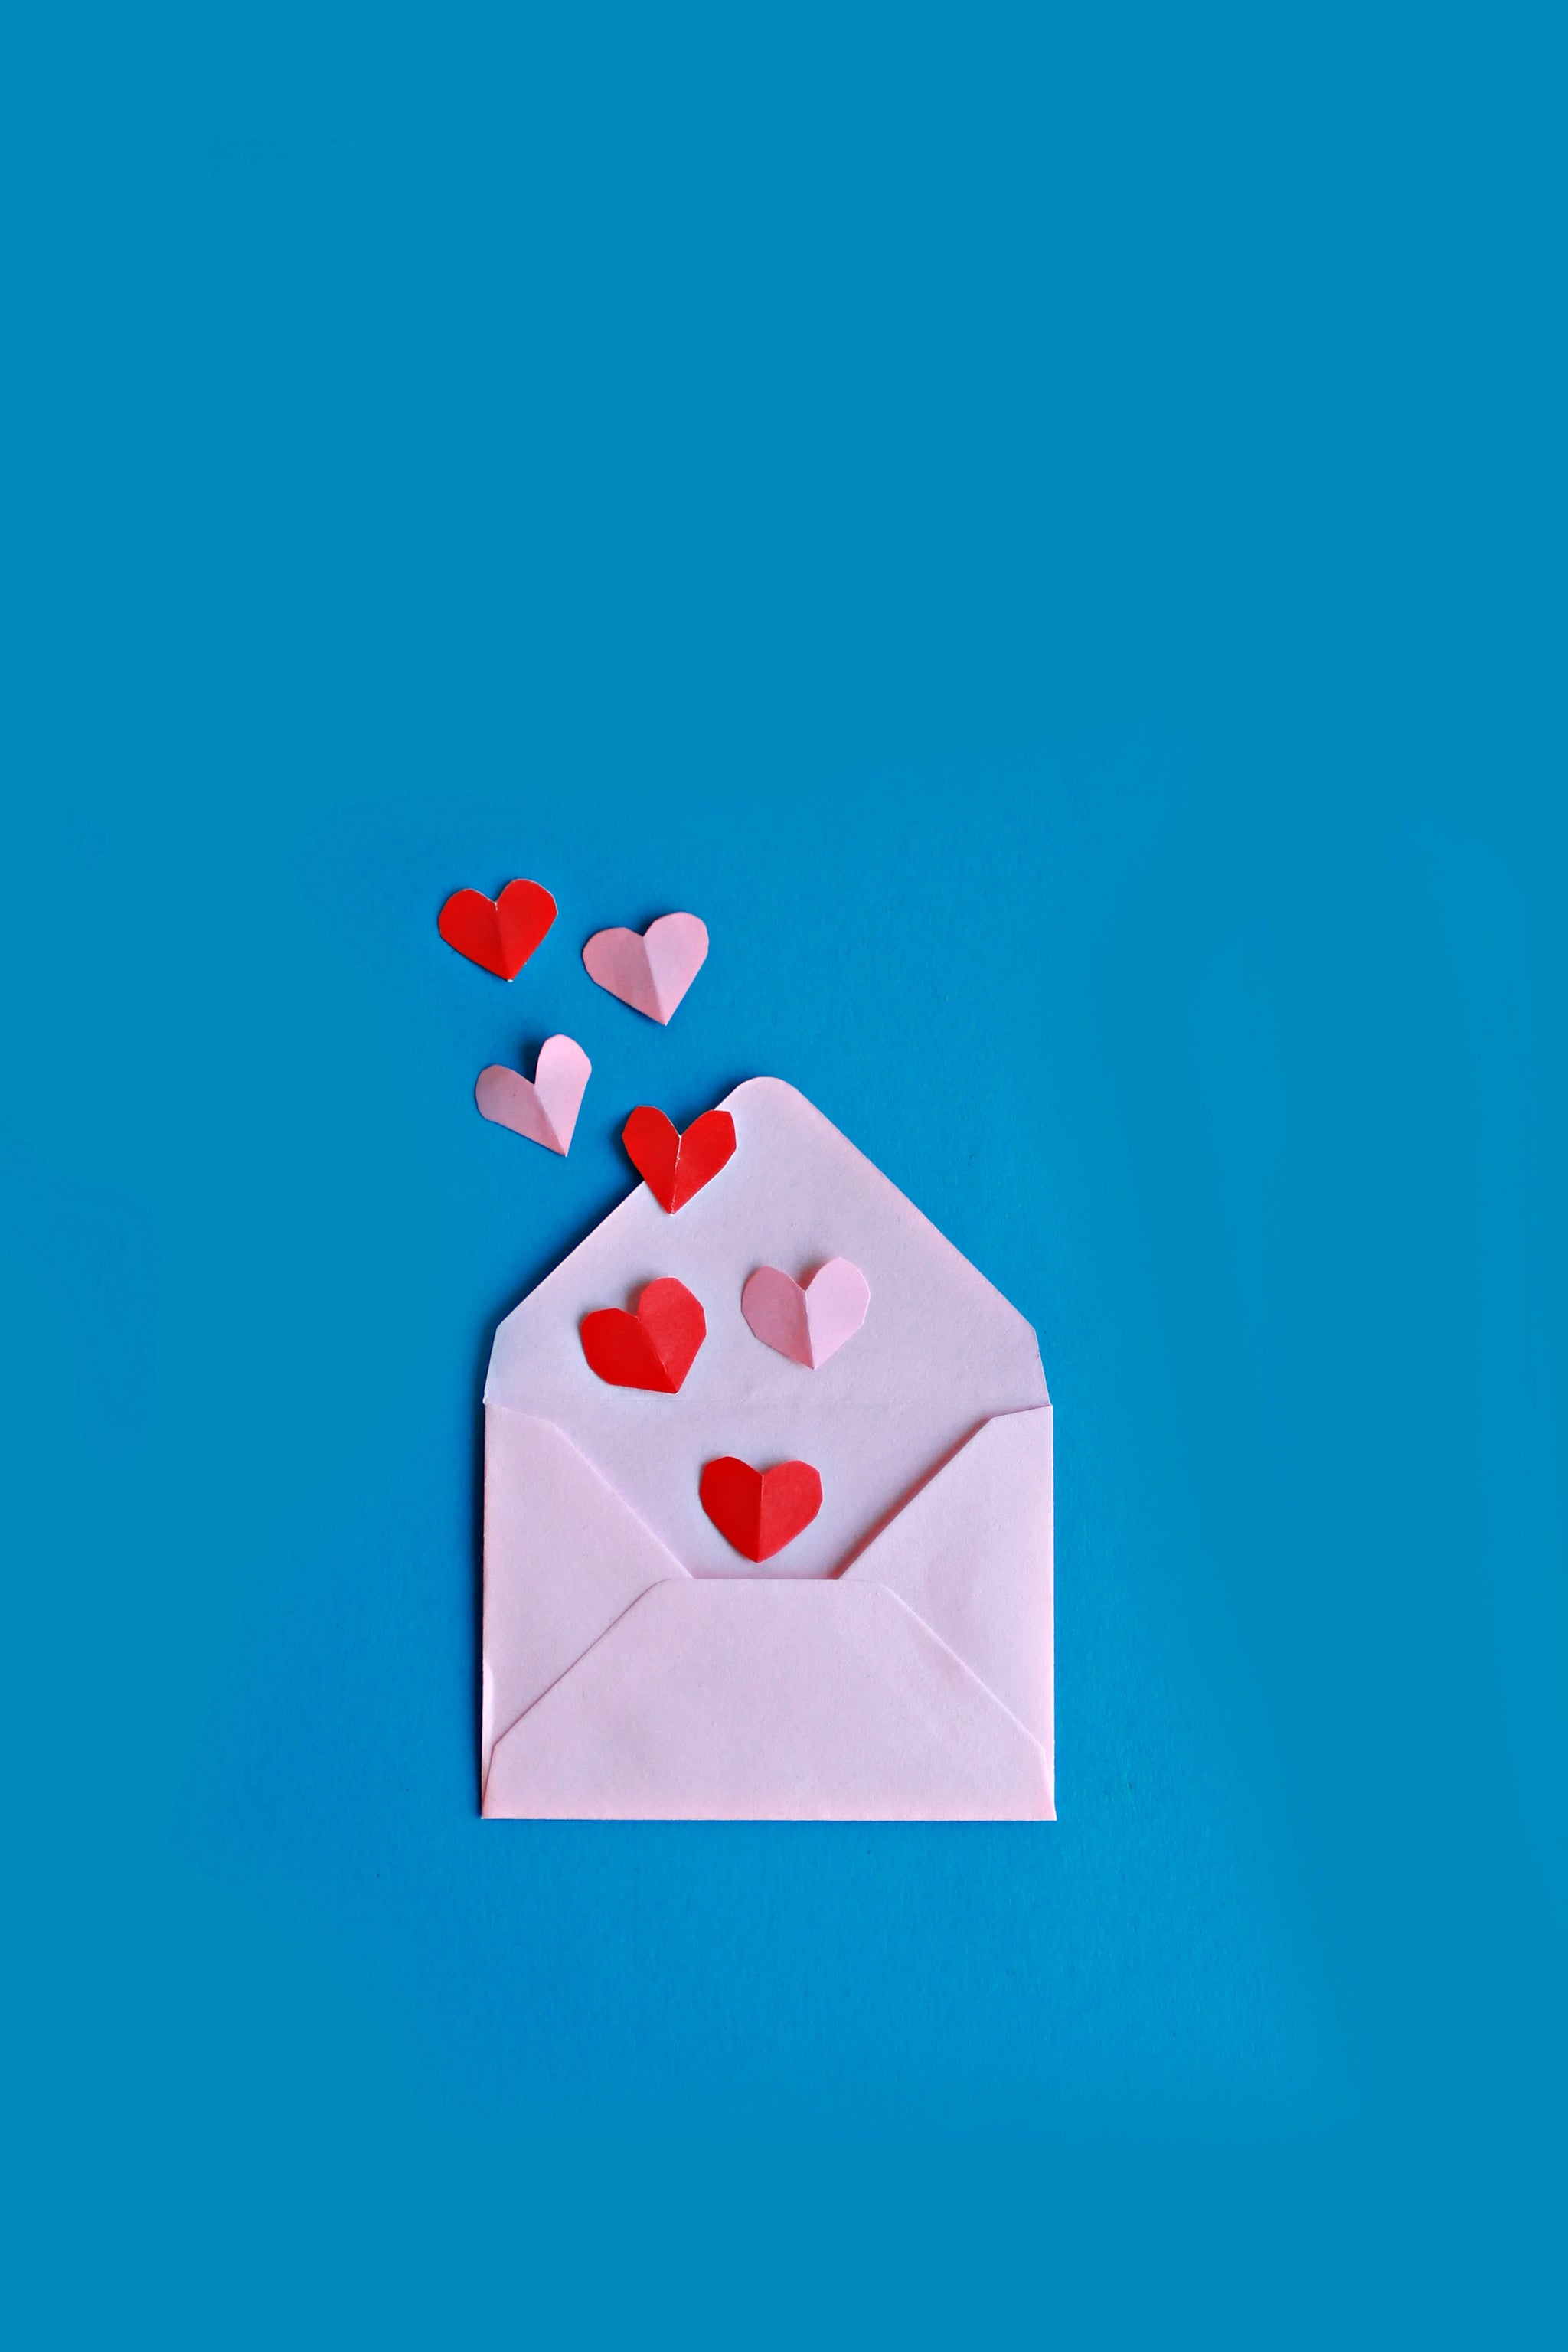 The Cutest Valentine's Day Wallpaper For Your Phone. POPSUGAR Technology UK